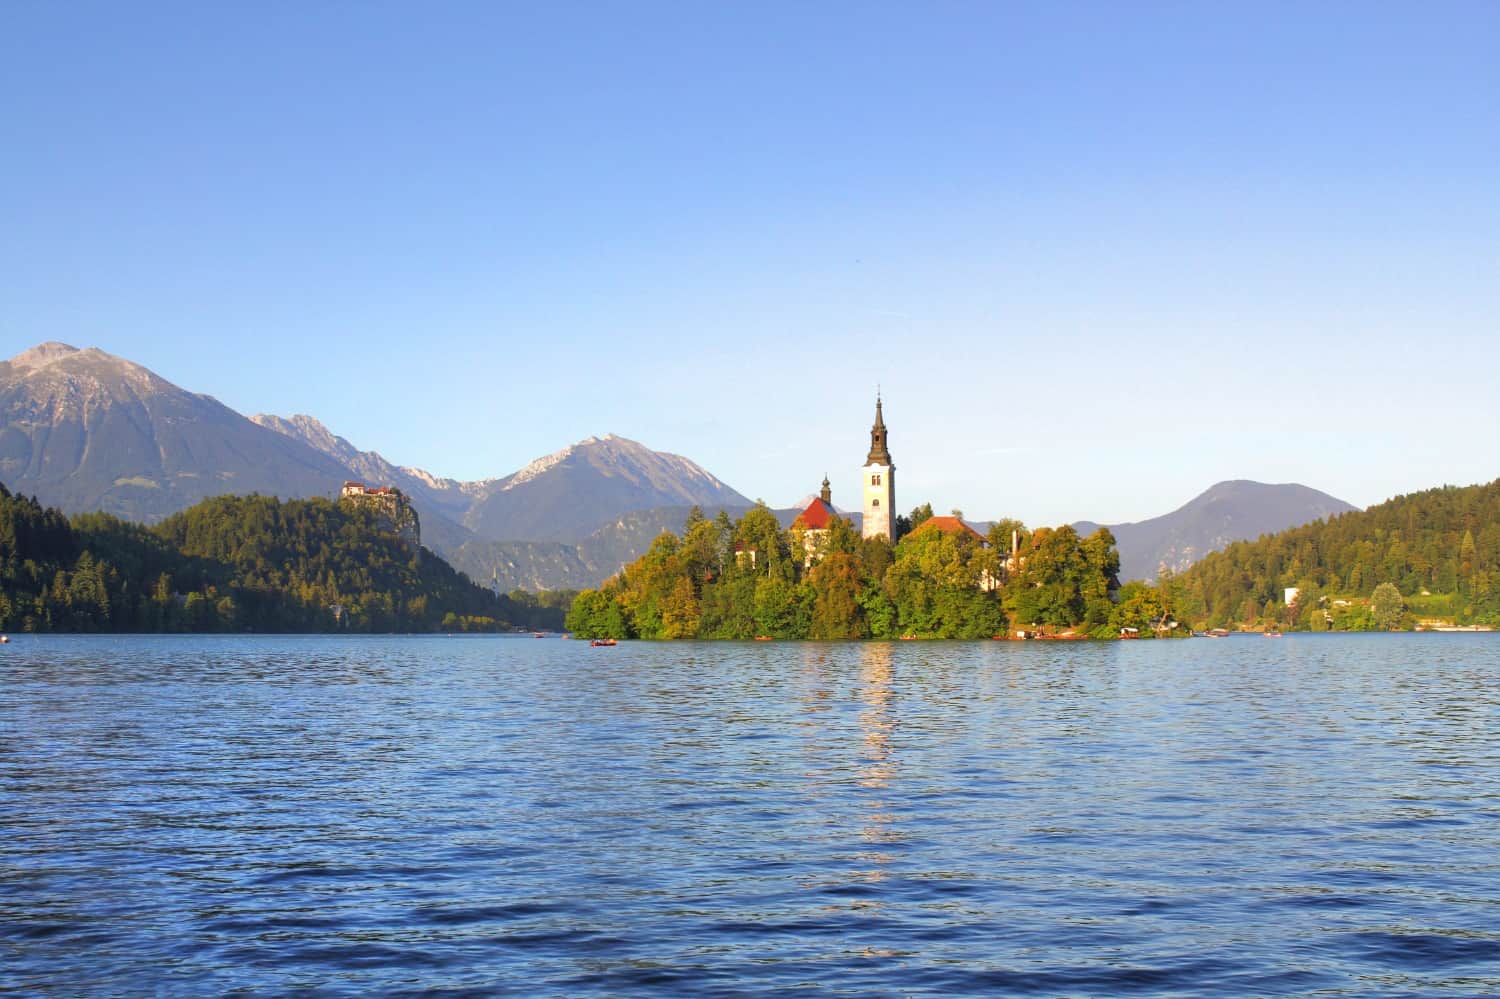 Views of Lake Bled's Island and Castle